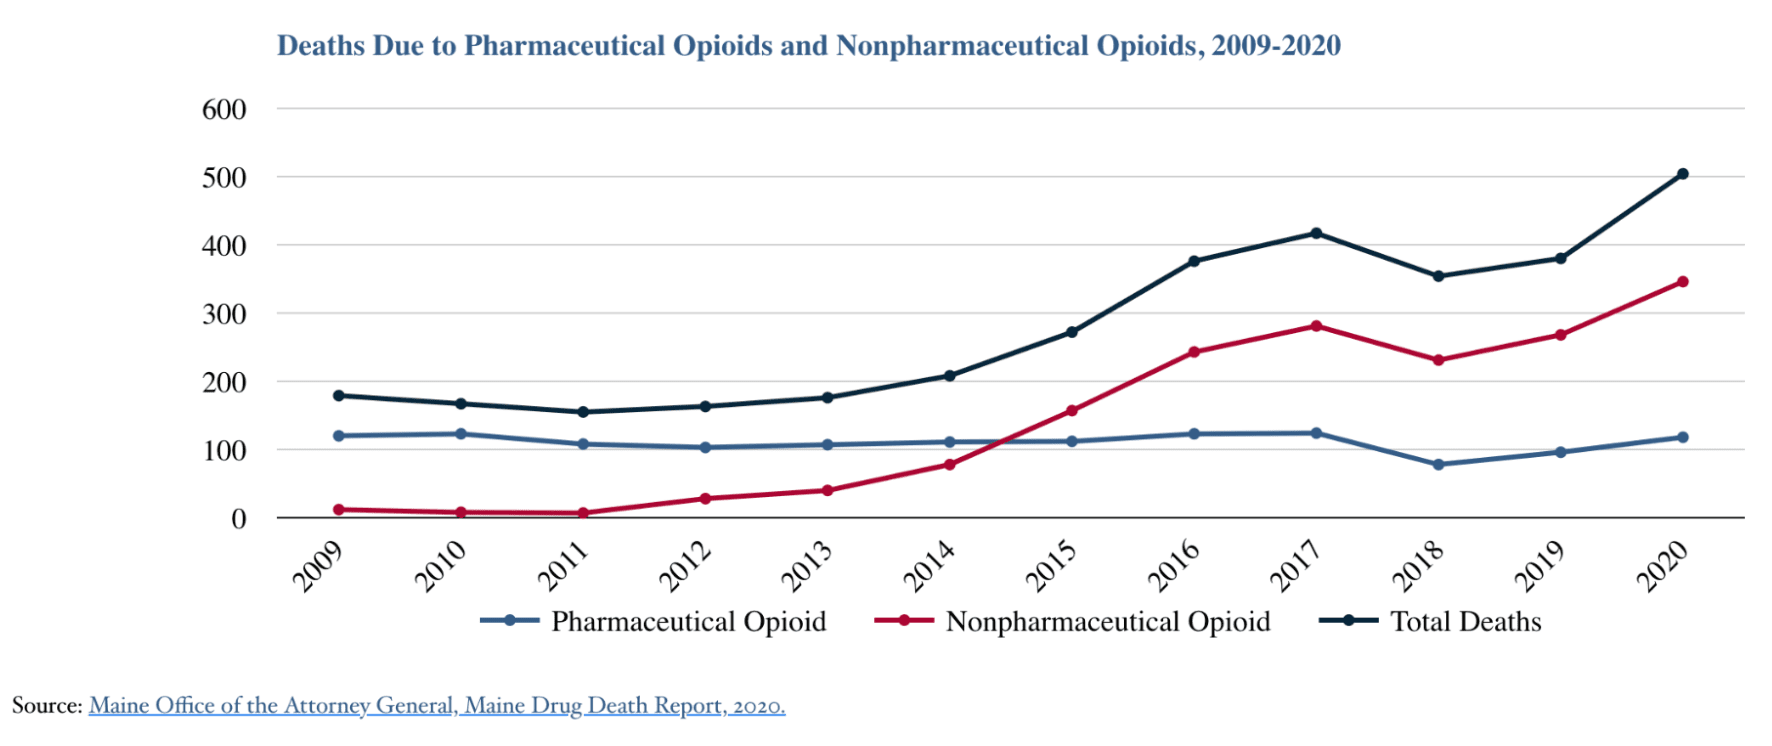 graphic showing the number of deaths due to pharmaceutical opioids and nonpharmaceutical opioids between 2009 and 2020 